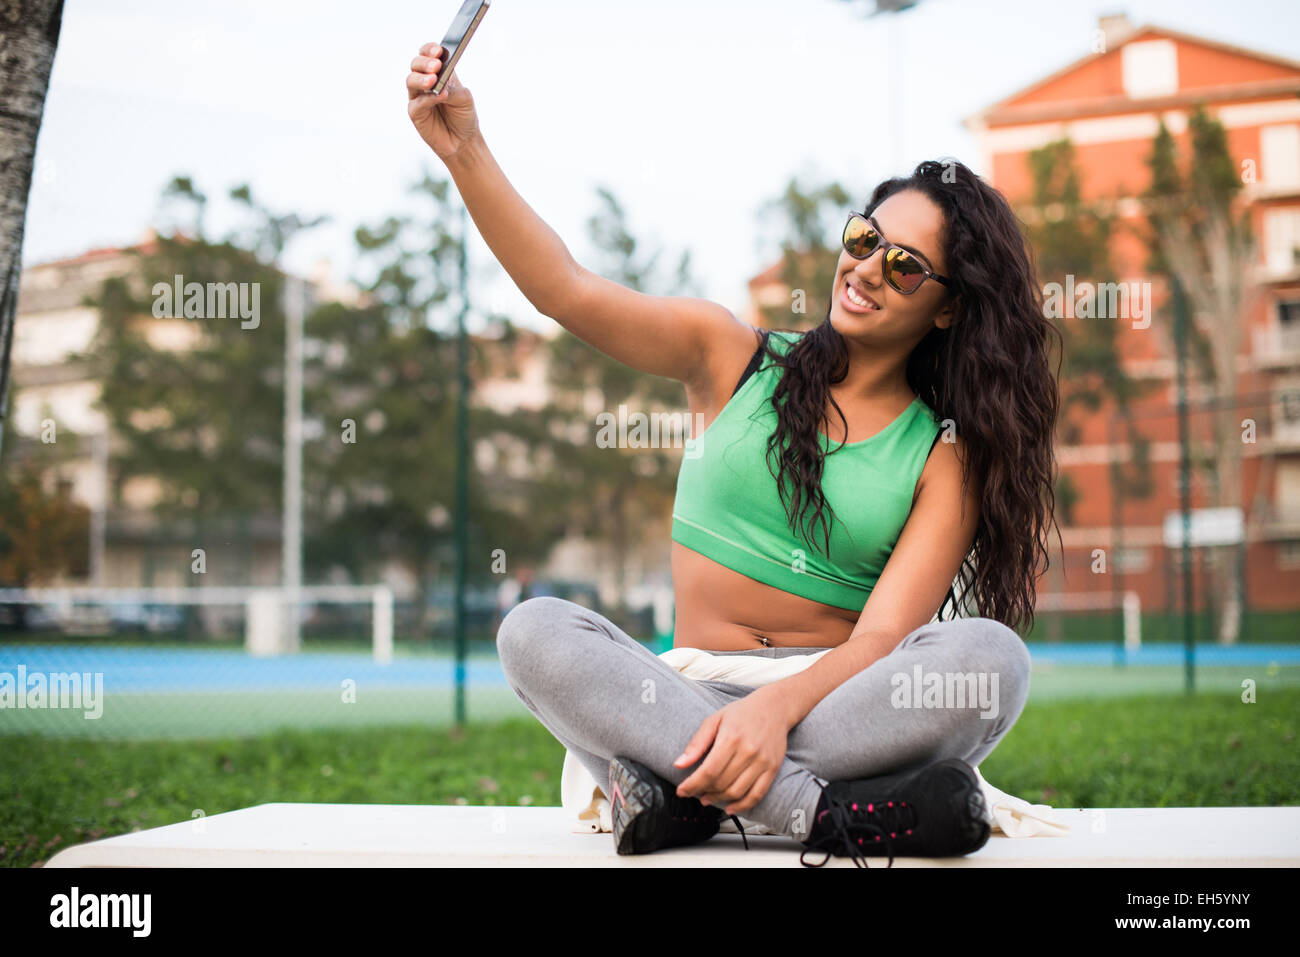 Sporty woman taking selfies at the park Stock Photo